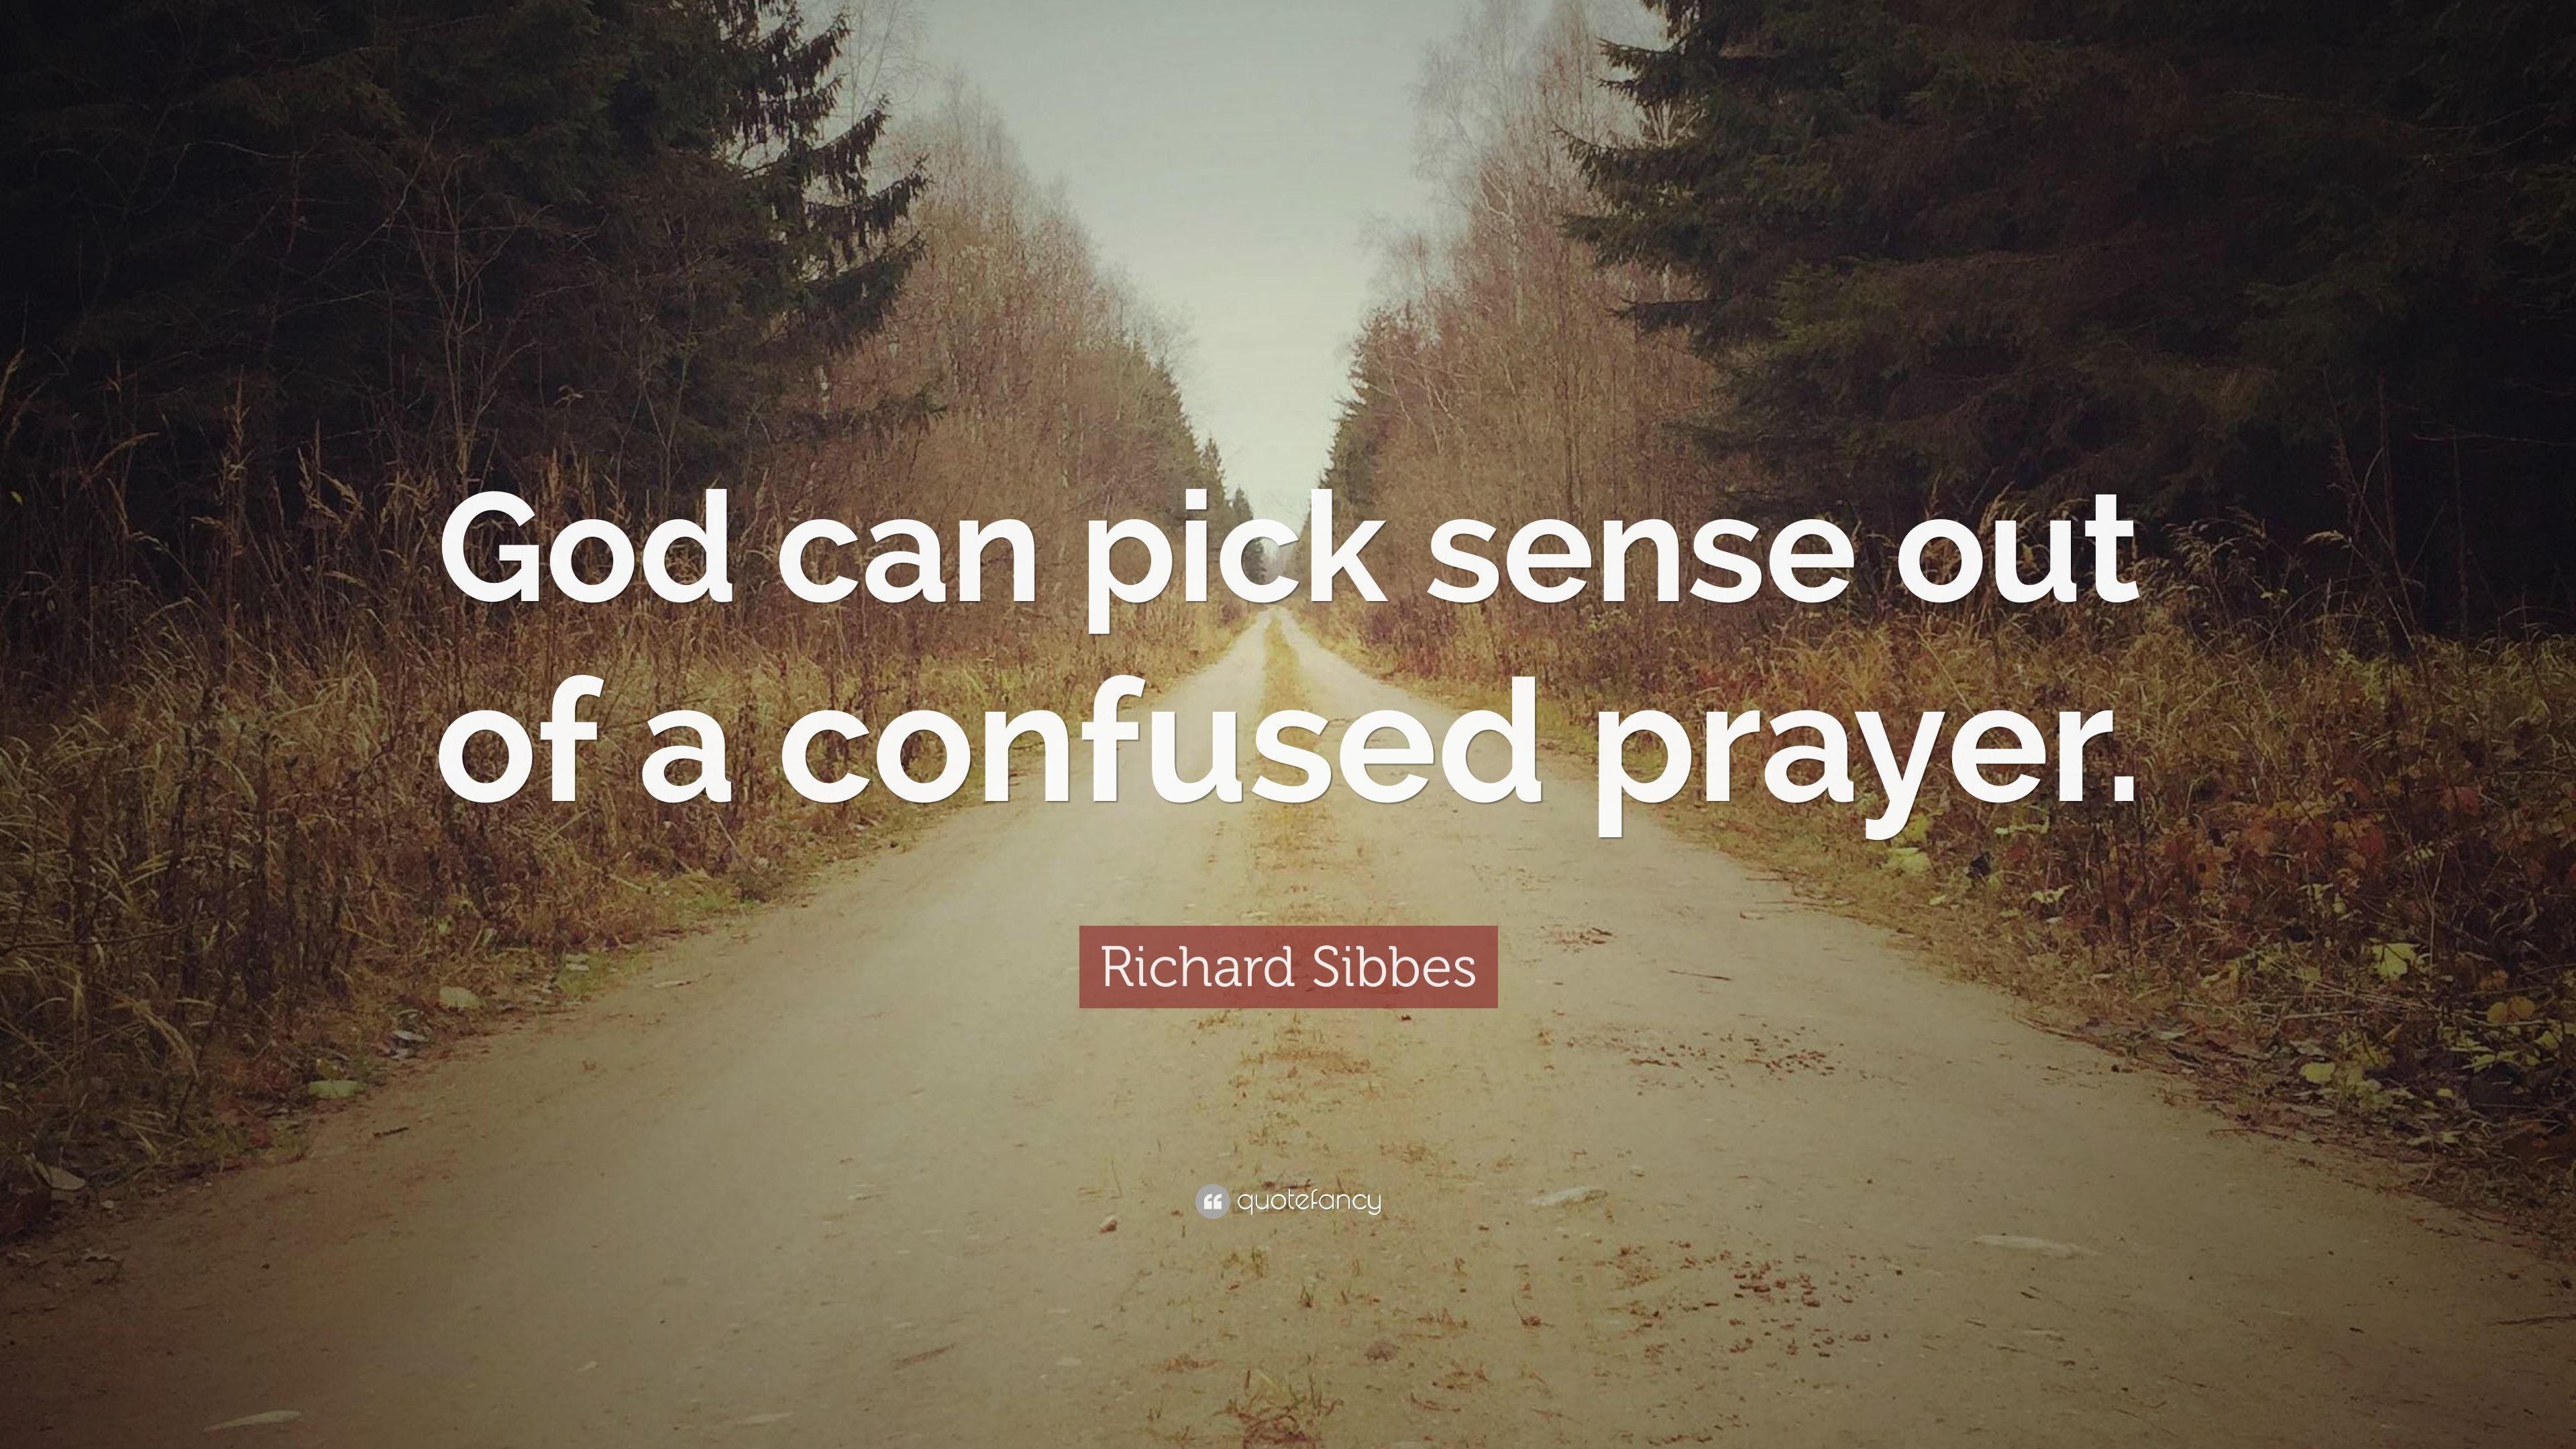 Richard Sibbes Quote: “God can pick sense out of a confused prayer